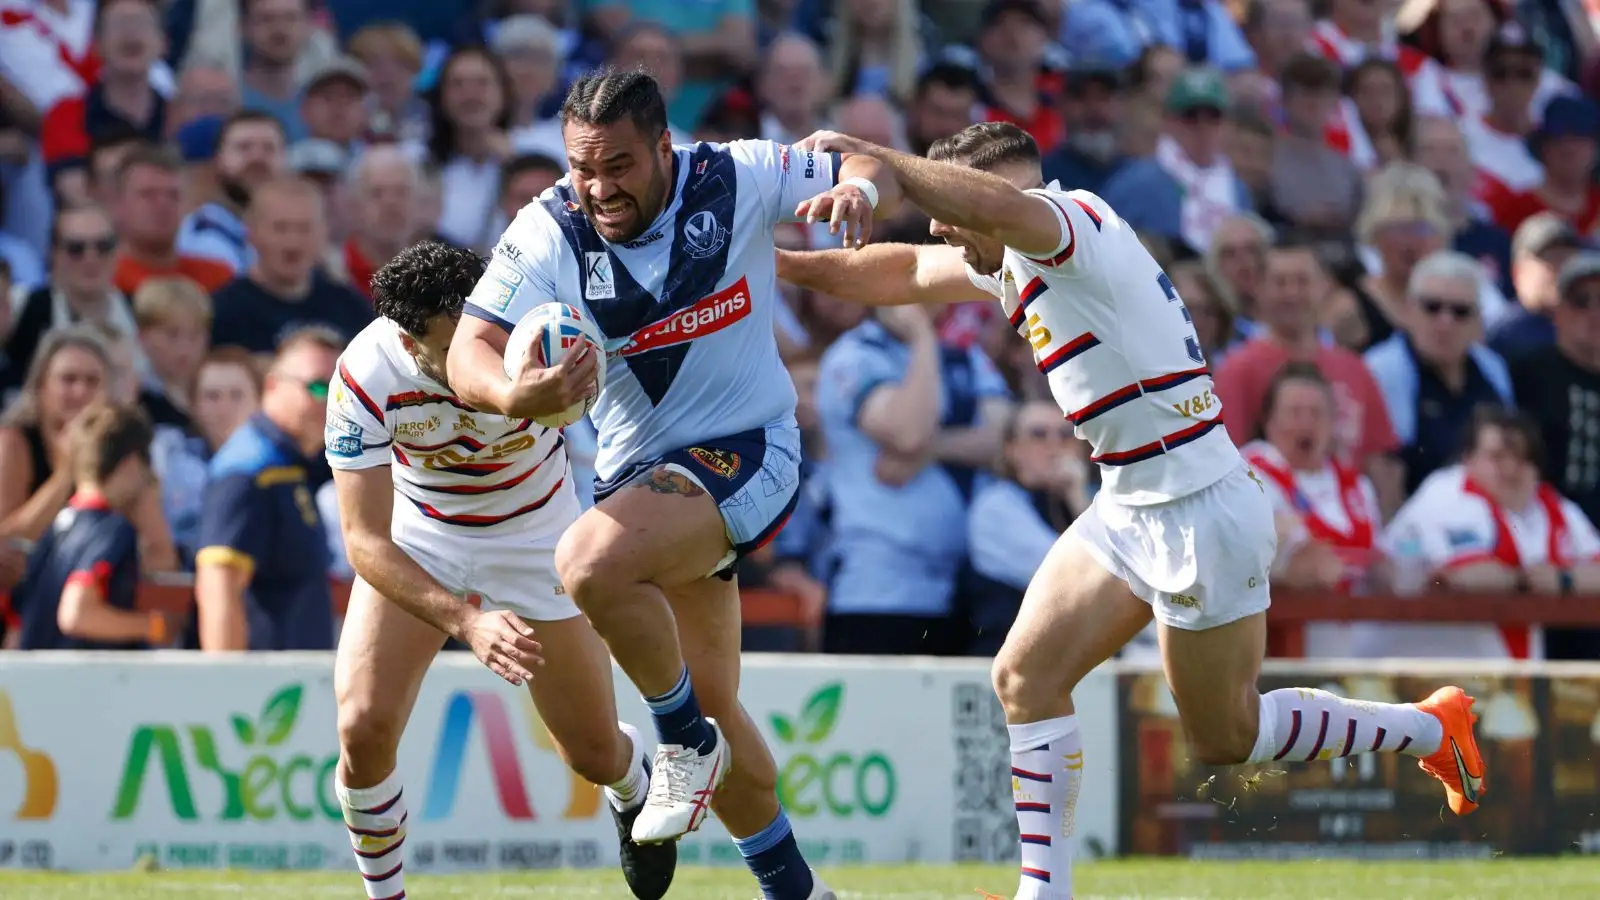 Konrad Hurrell suspended for dangerous tackle; major blows for Salford, Castleford and Hull